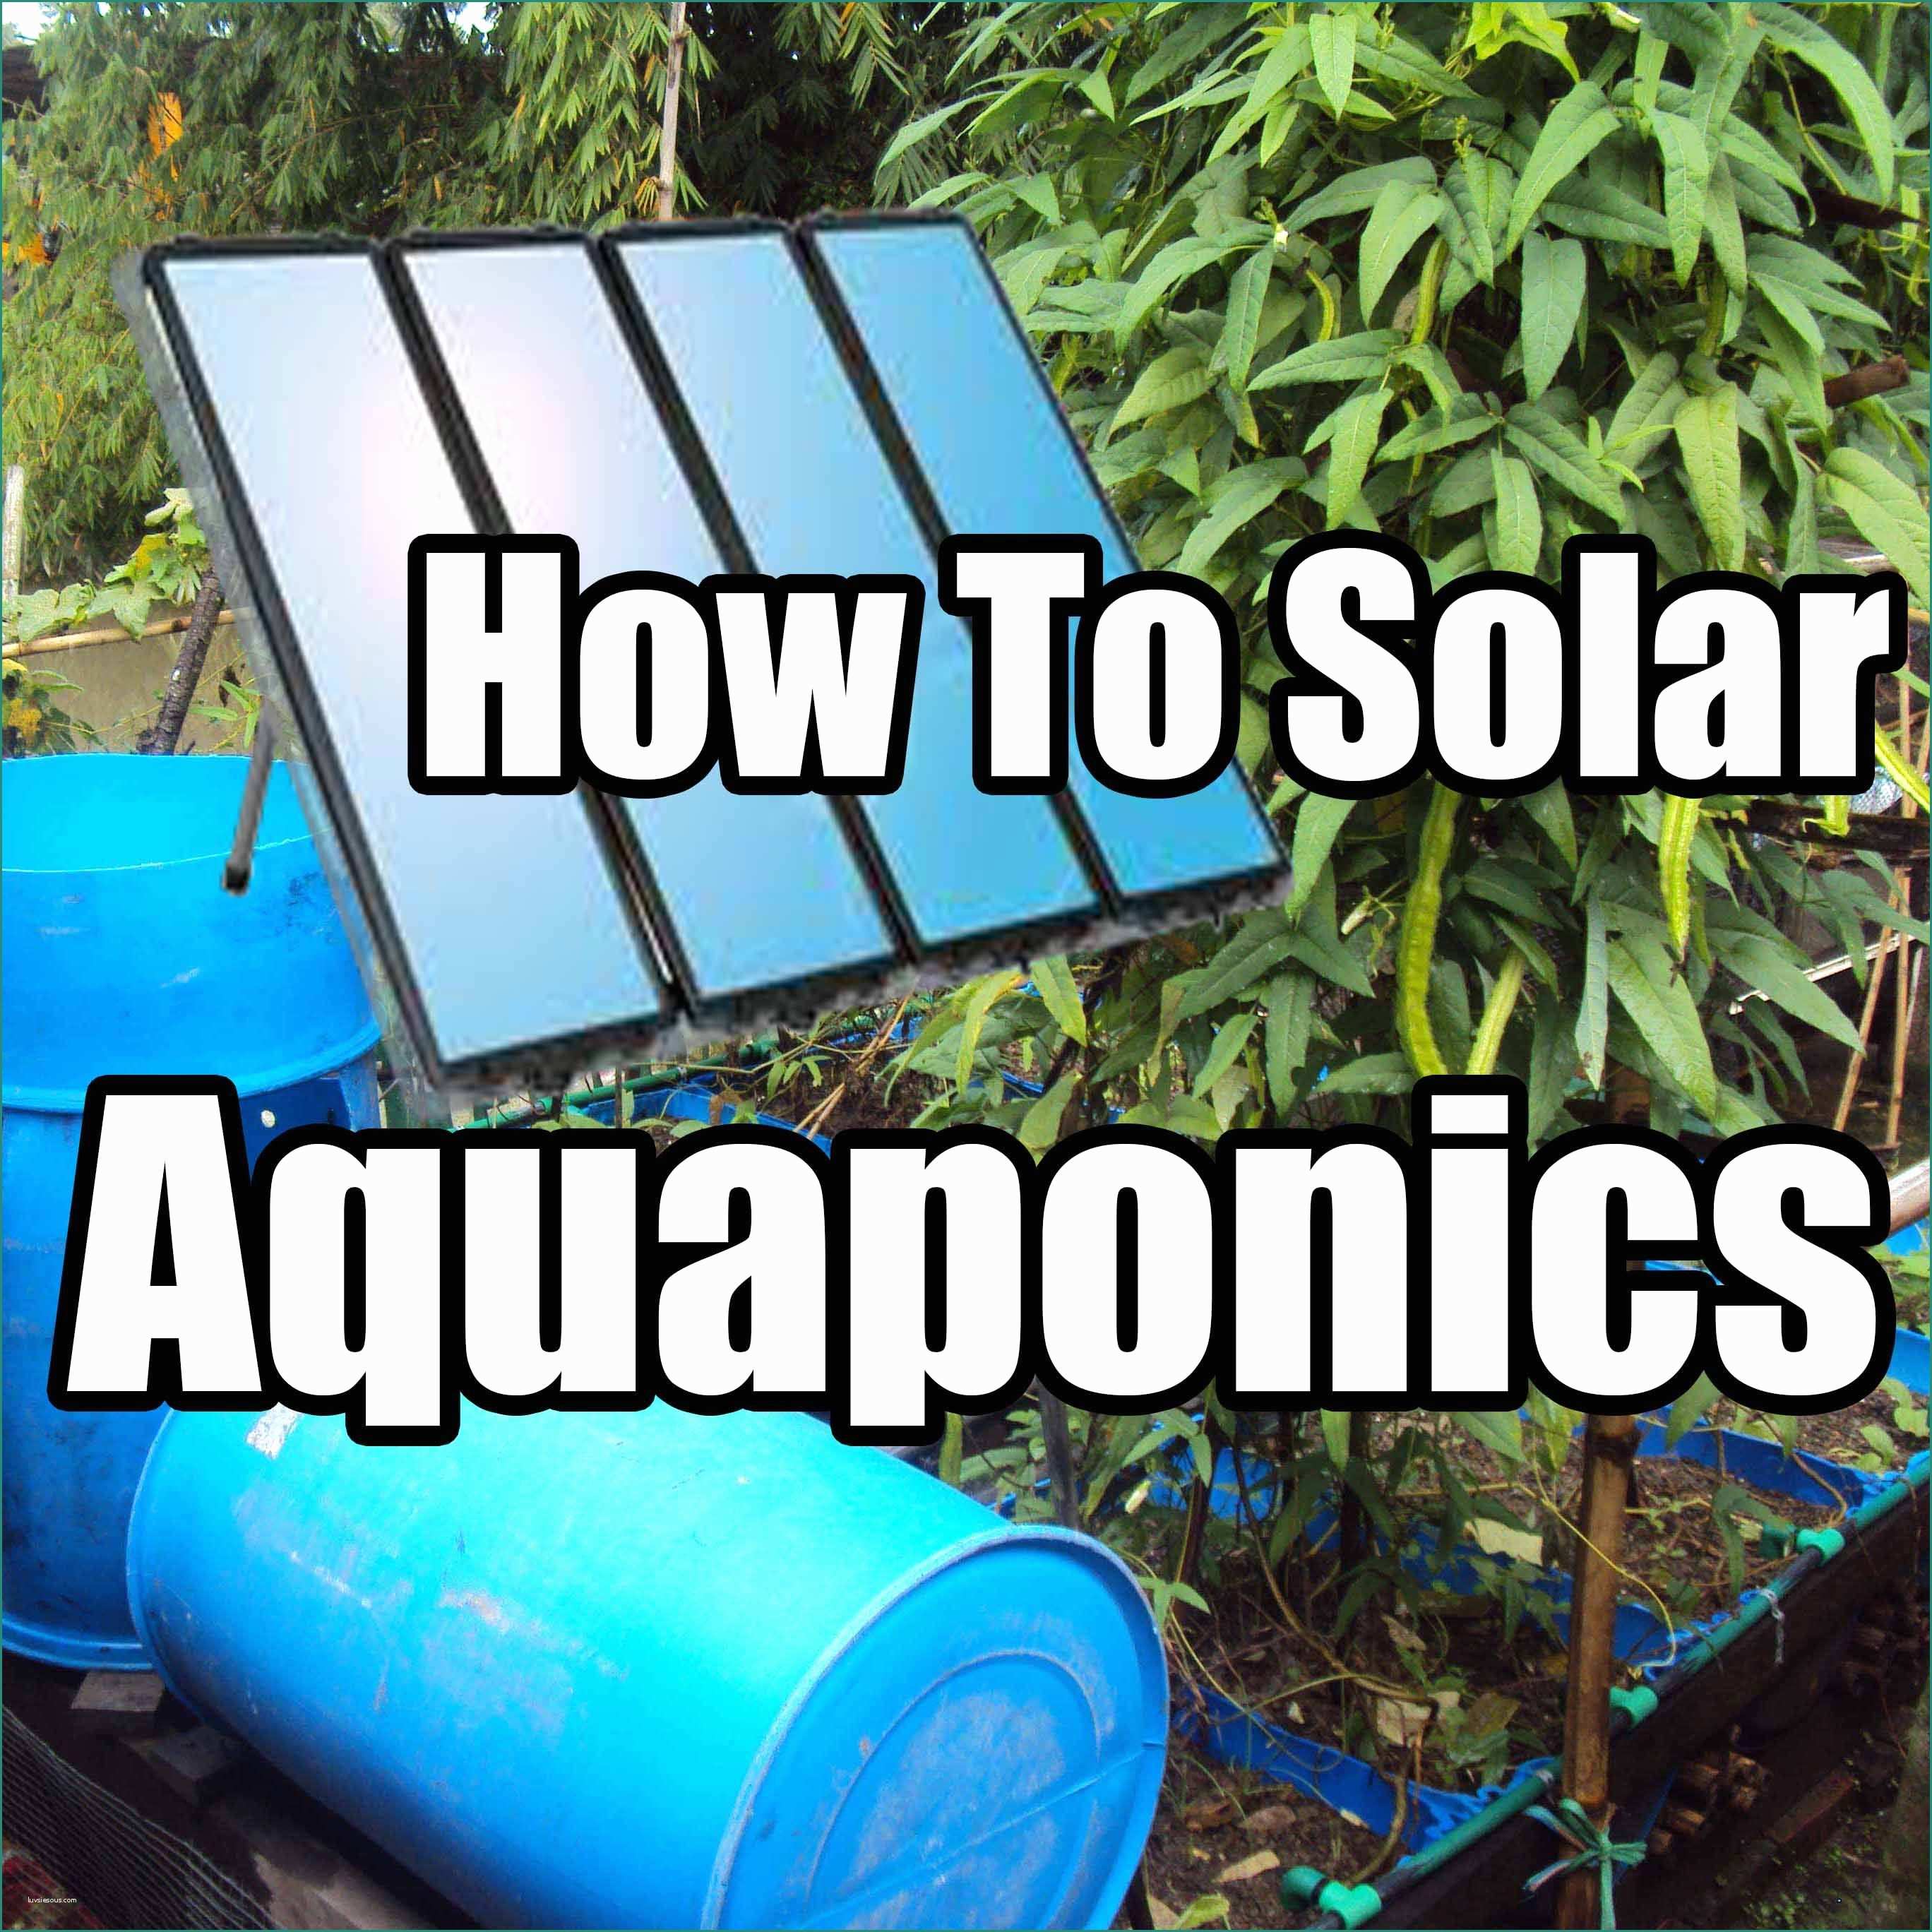 Coltivazione Idroponica Ikea E How to Diy Aquaponics the How to Diy Guide On Building Your Very